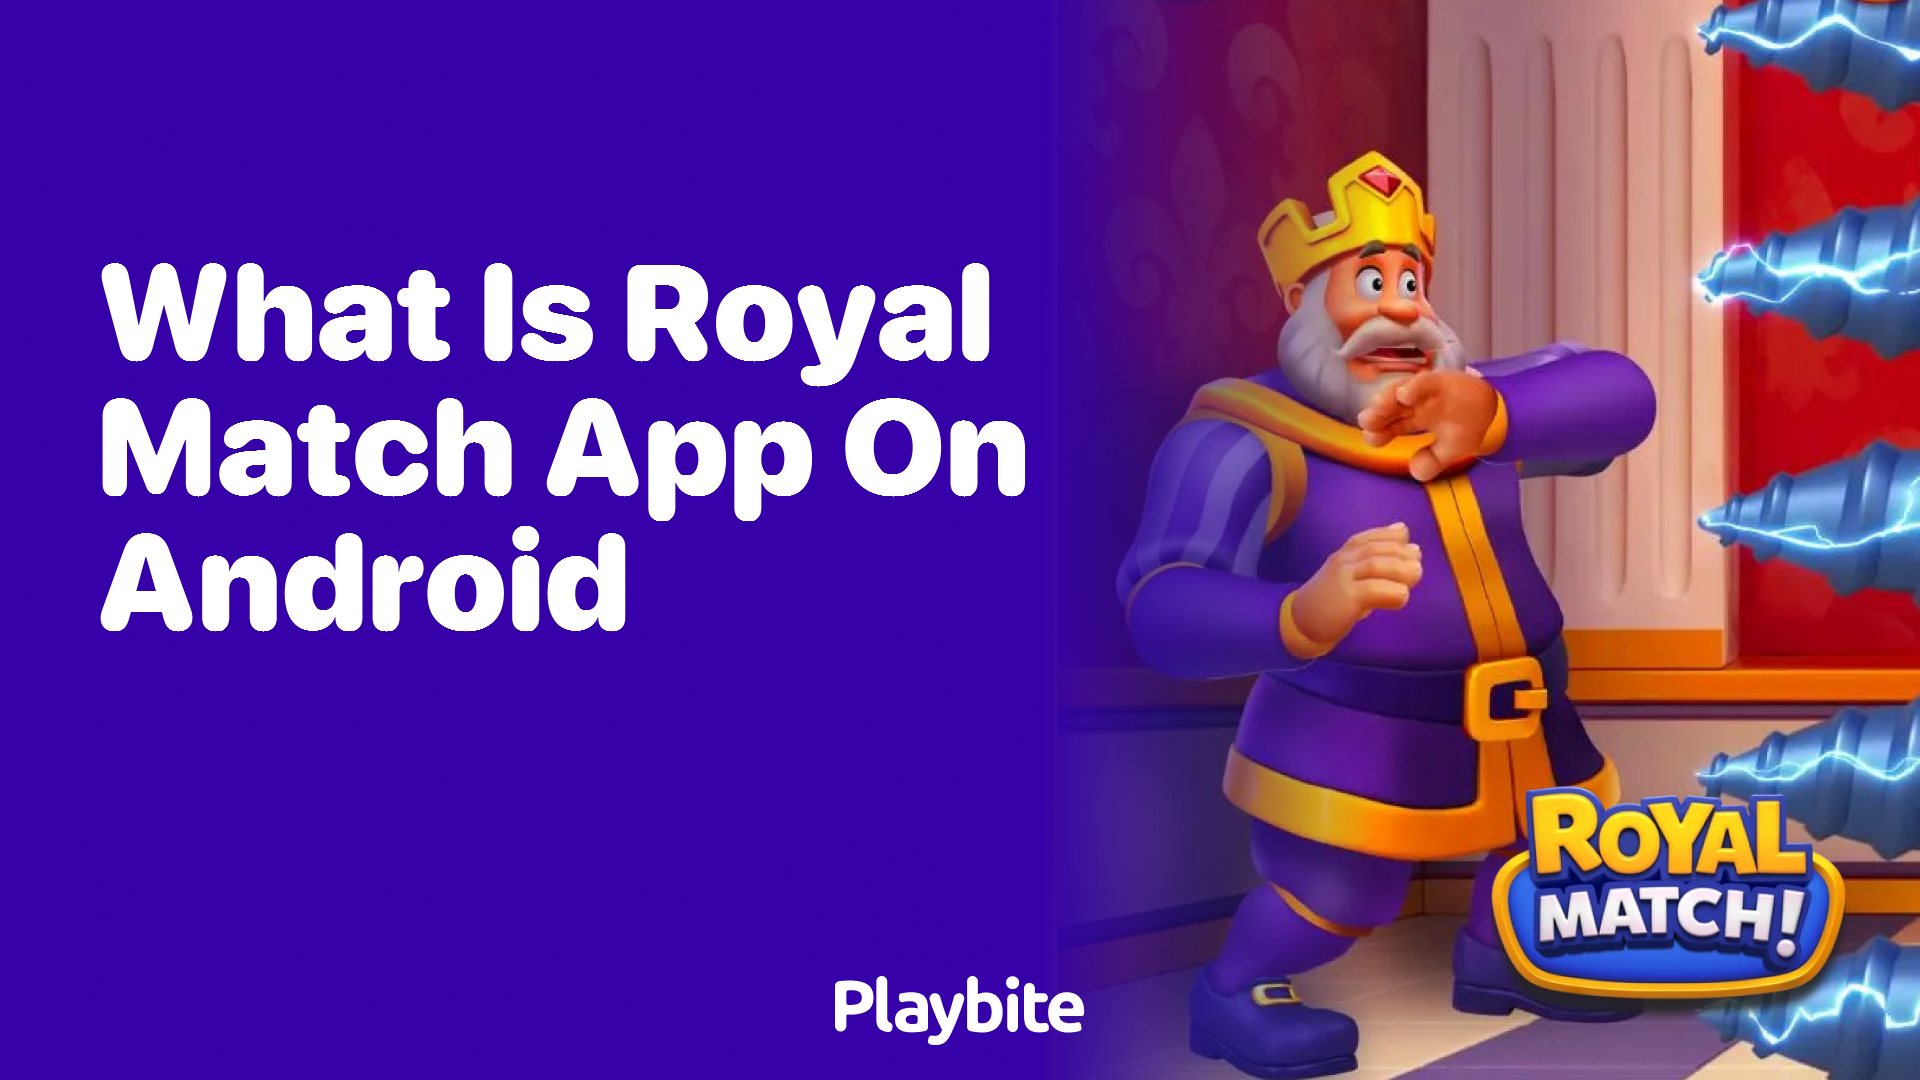 What is Royal Match App on Android?